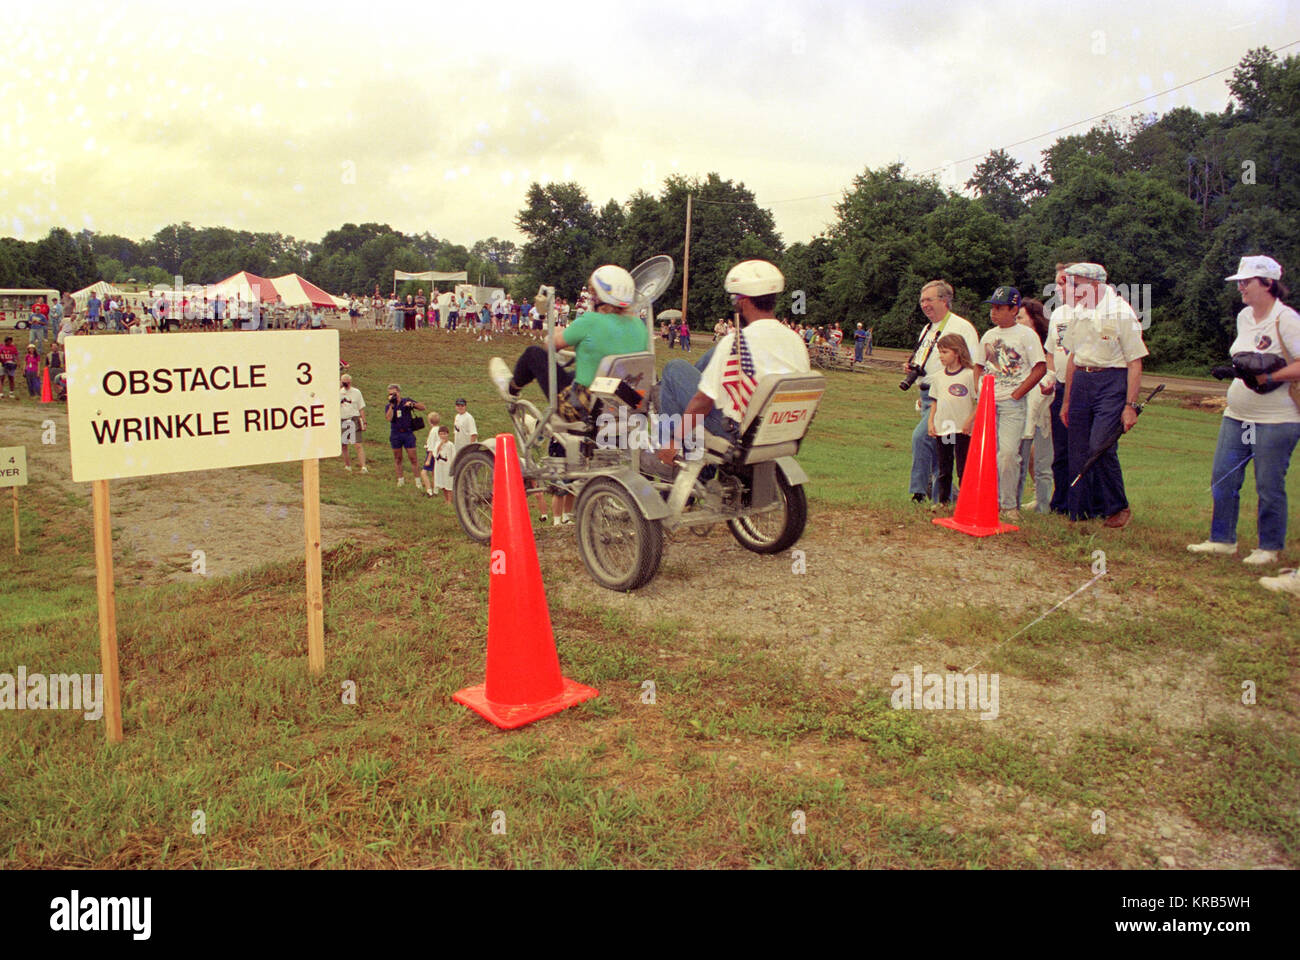 APOLLO 11 25TH ANNIVERSARY CELEBRATION: MOON BUGGY COMPETITION 1994 Great Moonbuggy Race Puerto Rico wrinkle ridge Stock Photo